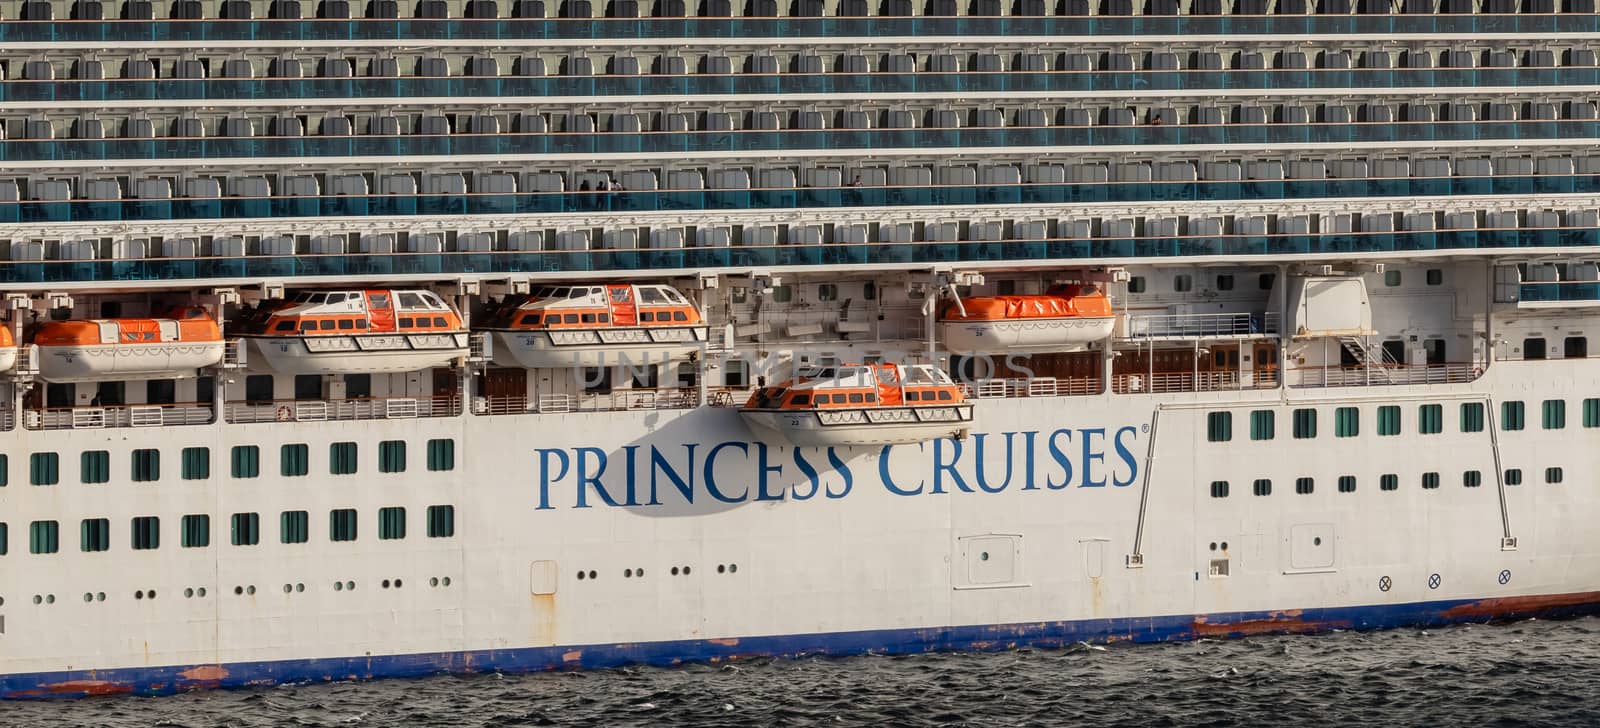 Carlisle Bay, Barbados, West Indies - May 16, 2020: Close view of Emerald Princess cruise ship's port side with the brand name of Princess Cruises on it and life boats above the name.